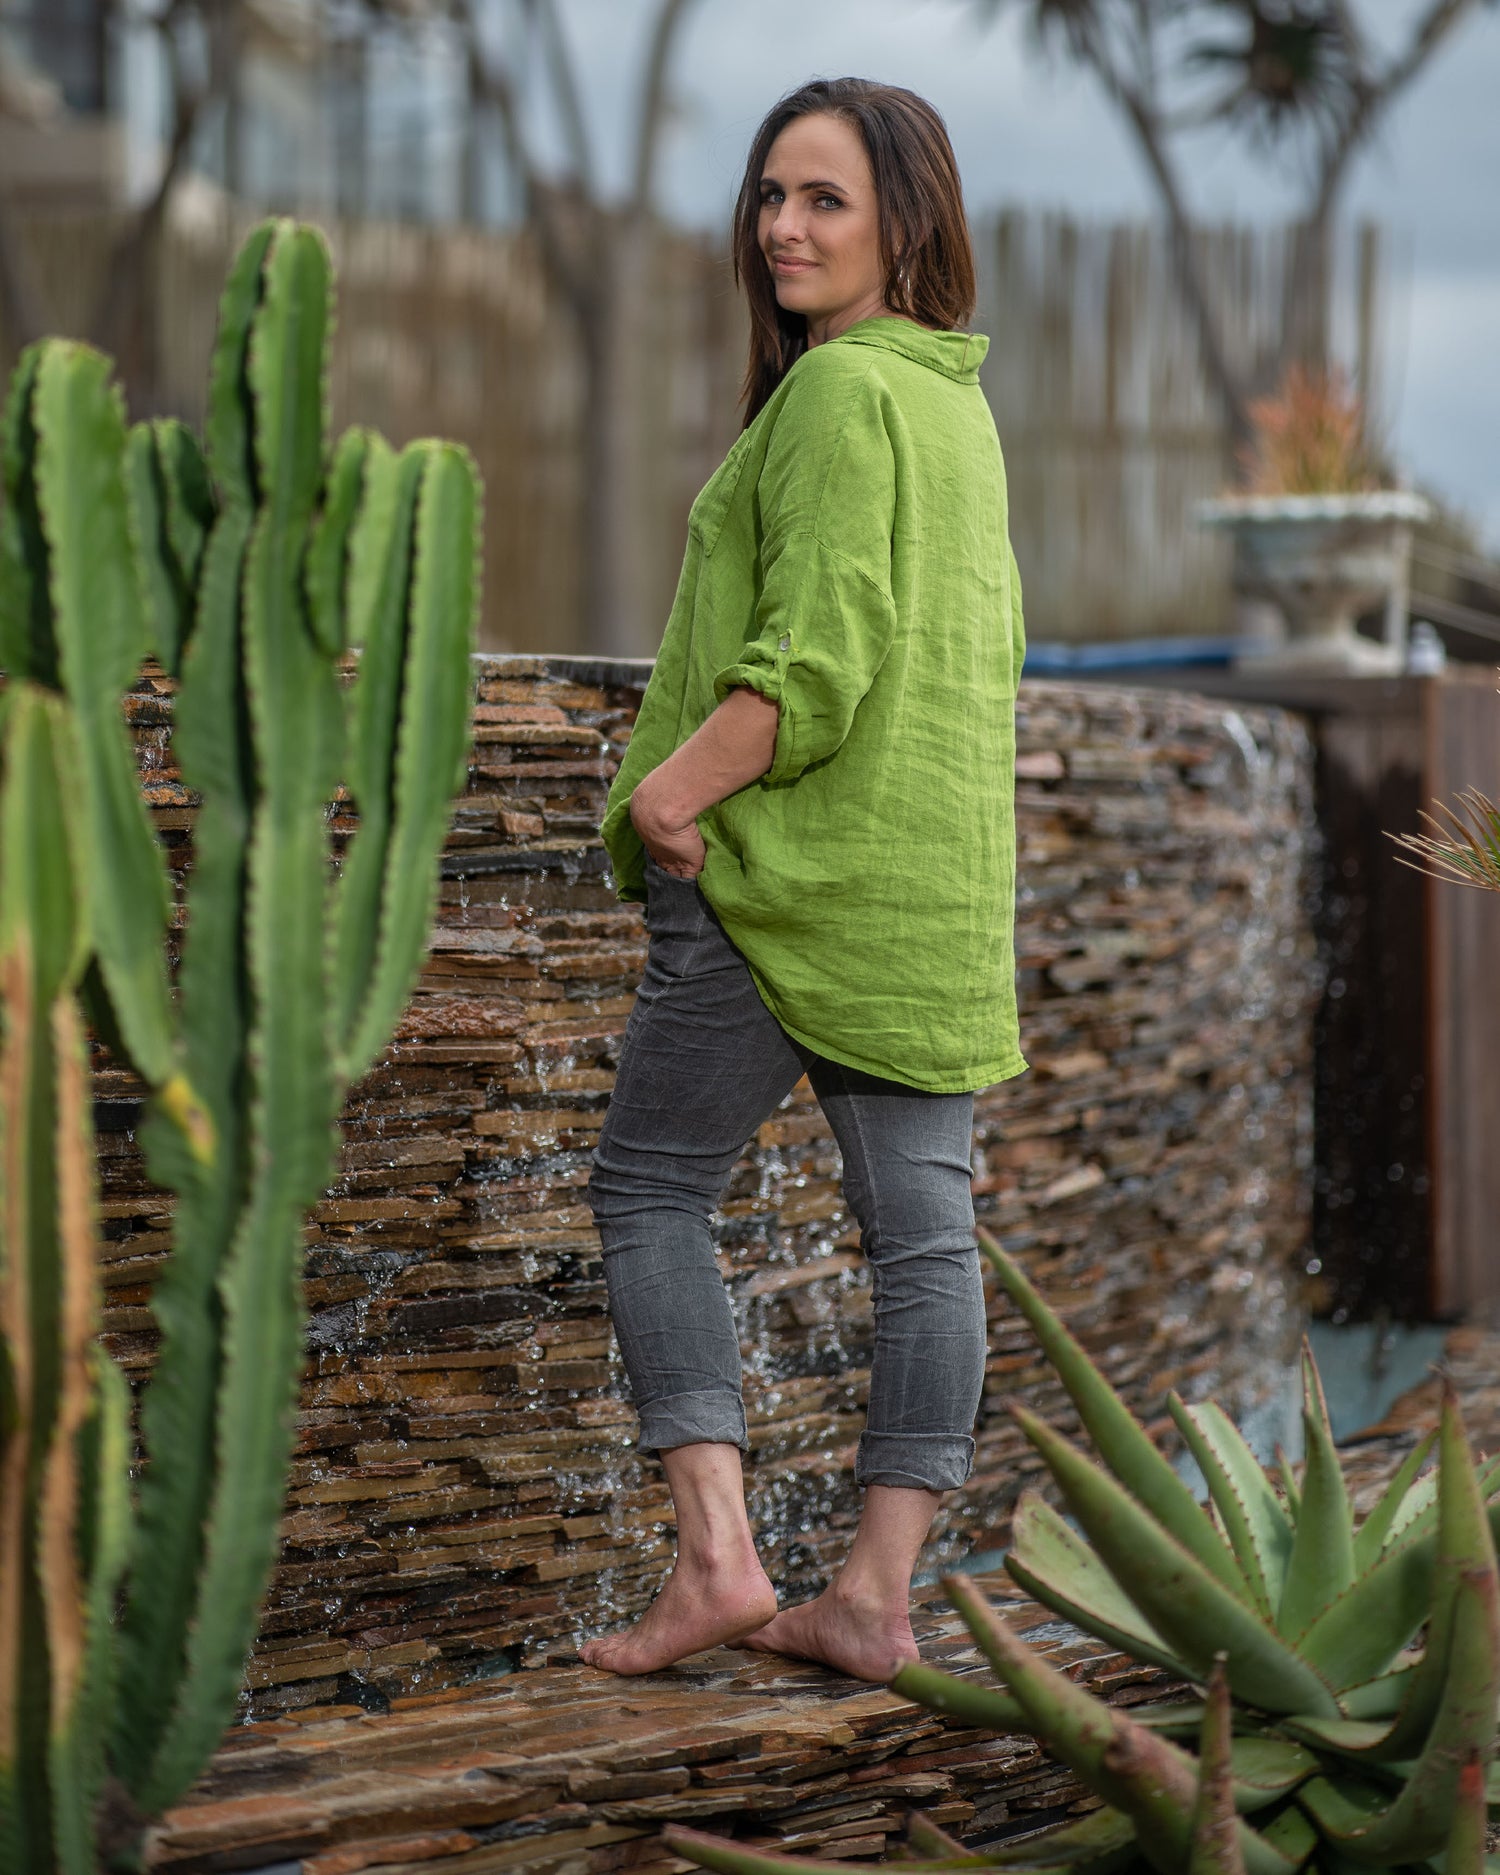 We've previously had this style and what a hit it was! Now available in 4 new colours to choose from. The 3/4 sleeves strike the perfect balance between coverage and breathability, making this top ideal for transitioning between seasons. Decorative front pocket that adds a subtle yet distinctive element to the design